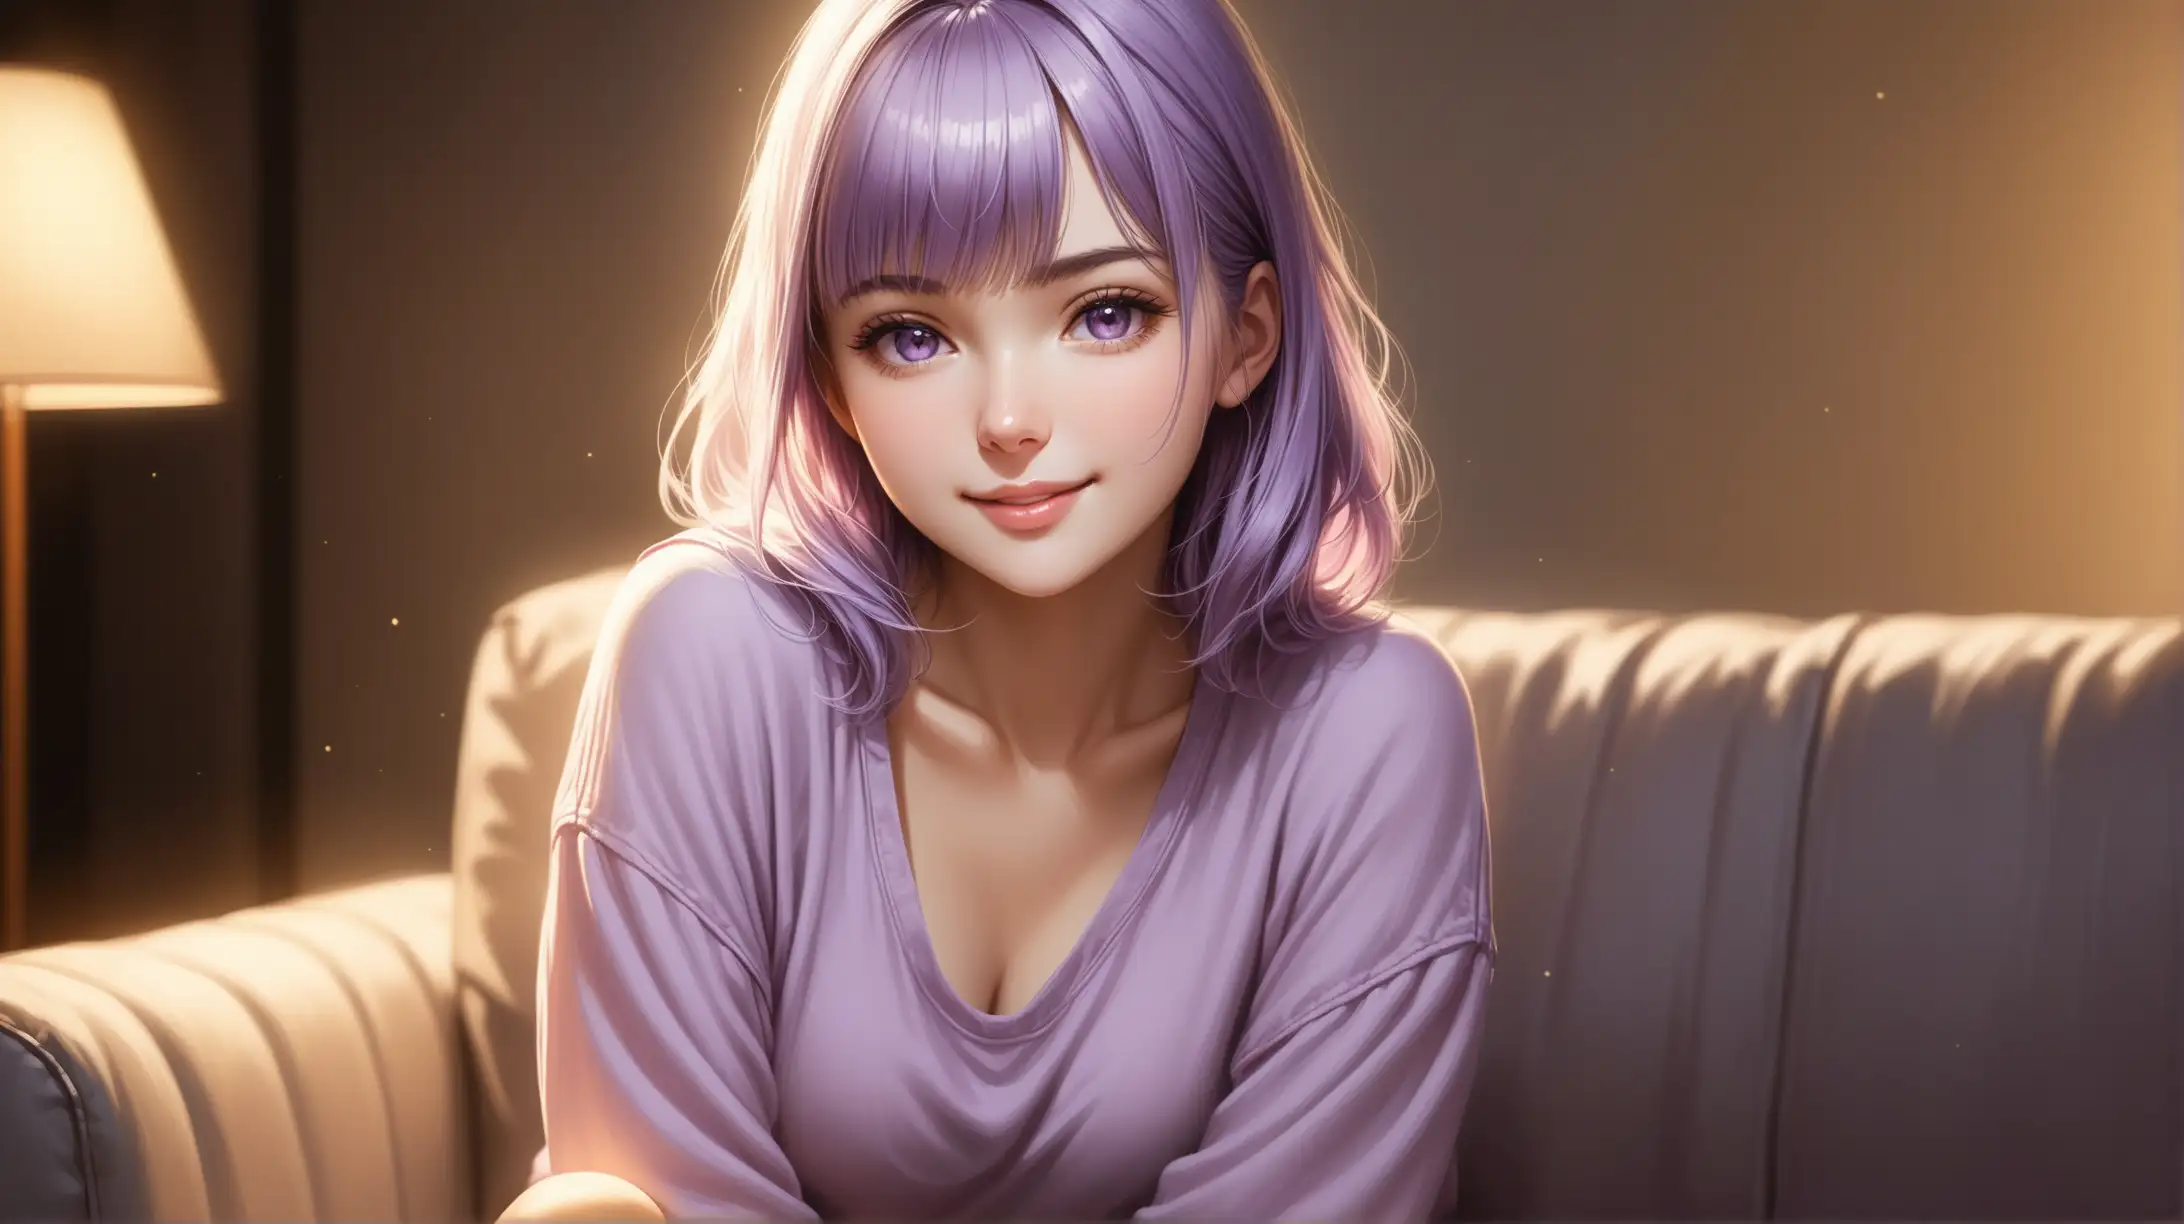 Draw a woman, shoulder length light purple hair, messy bangs framing her face, light purple eyes, petite figure, high quality, realistic, accurate, detailed, long shot, indoors, sitting on sofa, dim lighting, seductive pose, casual summer outfit, smiling at the viewer